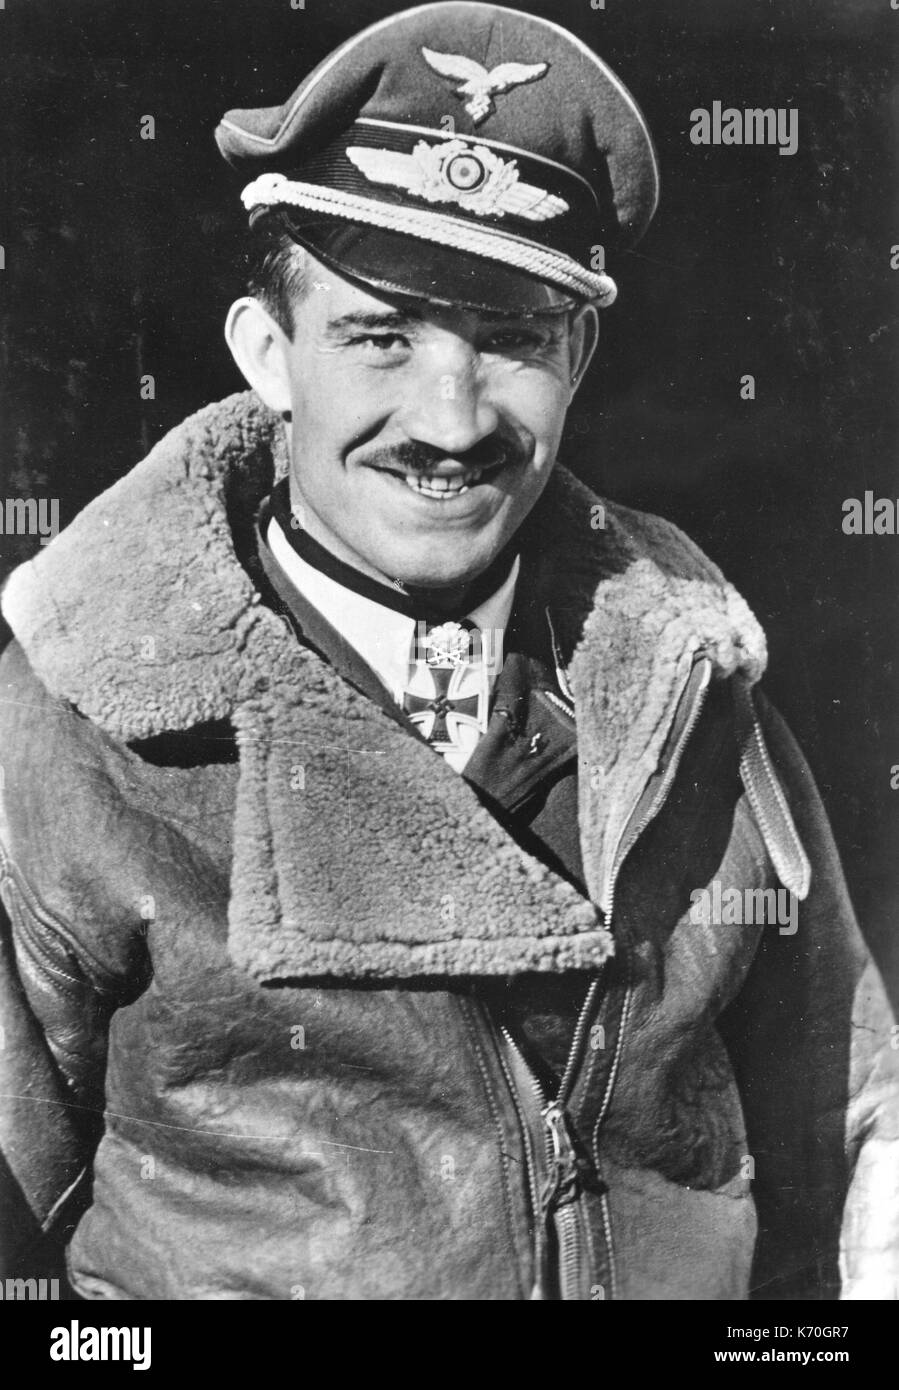 Adolf Galland (1912-1996) was a German Luftwaffe General and flying ace in World War II. Stock Photo